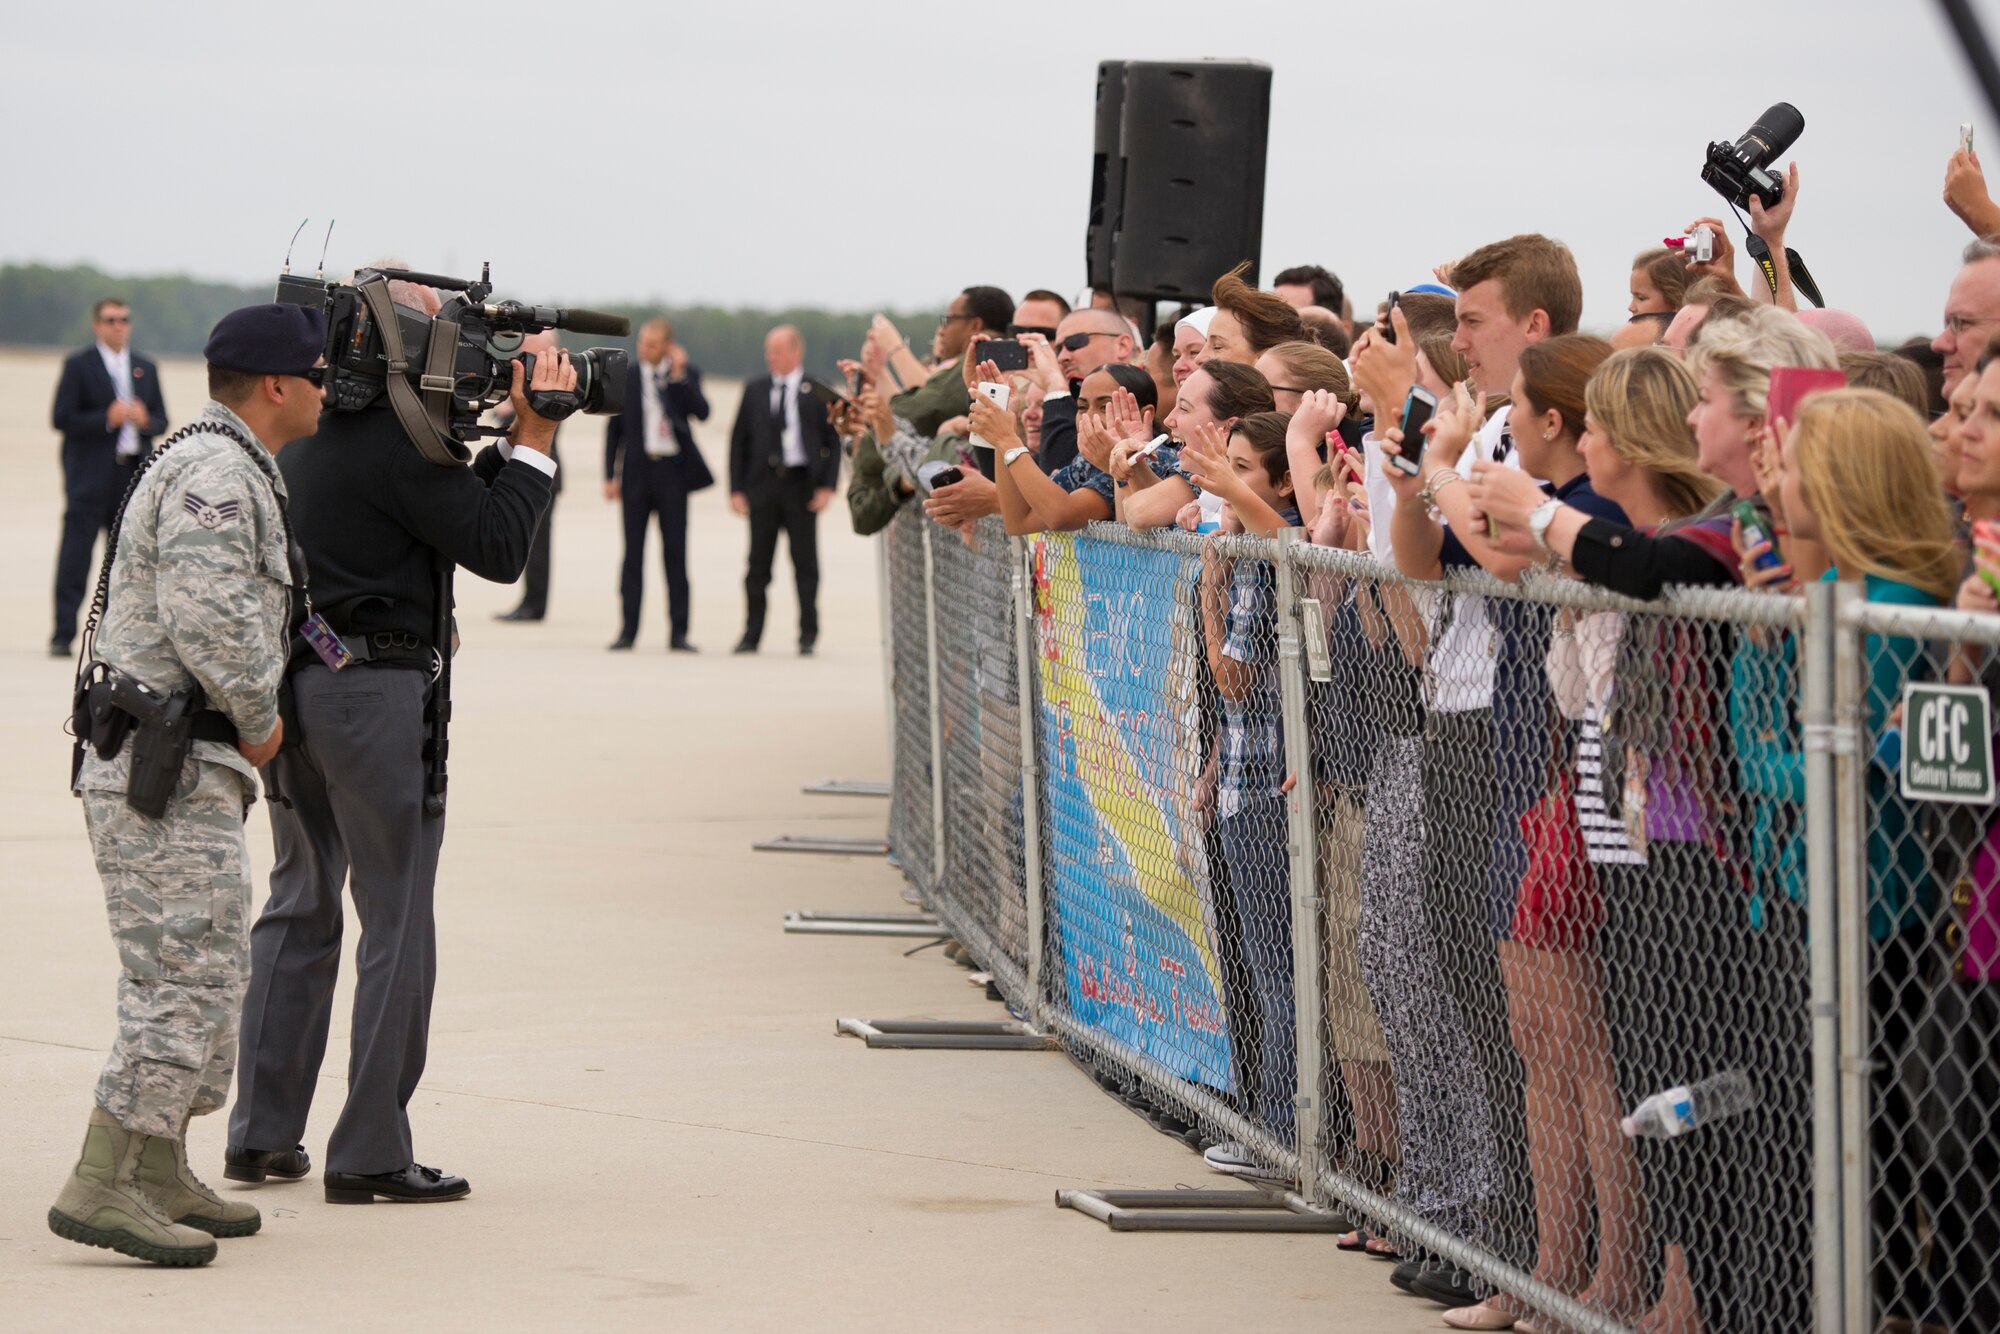 Crowds cheer and applaud in anticipation of Pope Francis's  at Joint Base Andrews, Md., Sept. 22, 2015. This marks the first visit by the current pope to the United States. (U.S. Air Force photo/Tech. Sgt. Robert Cloys)